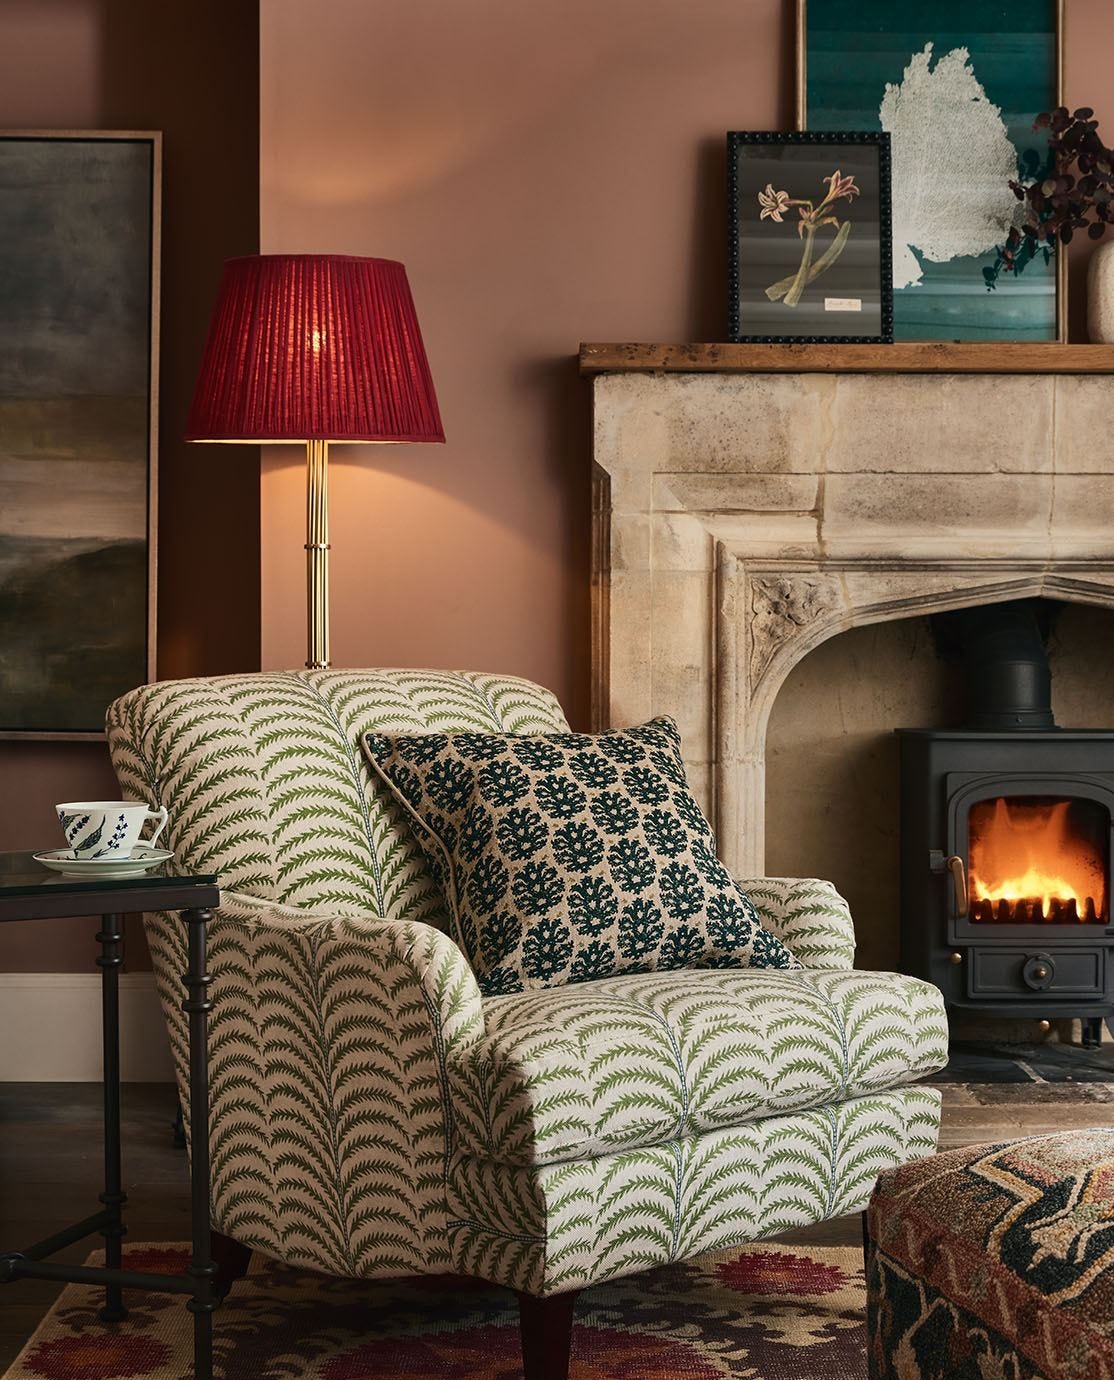 A palm-print armchair, decorated with a blue patterned cushion, sits in front of a fireplace.